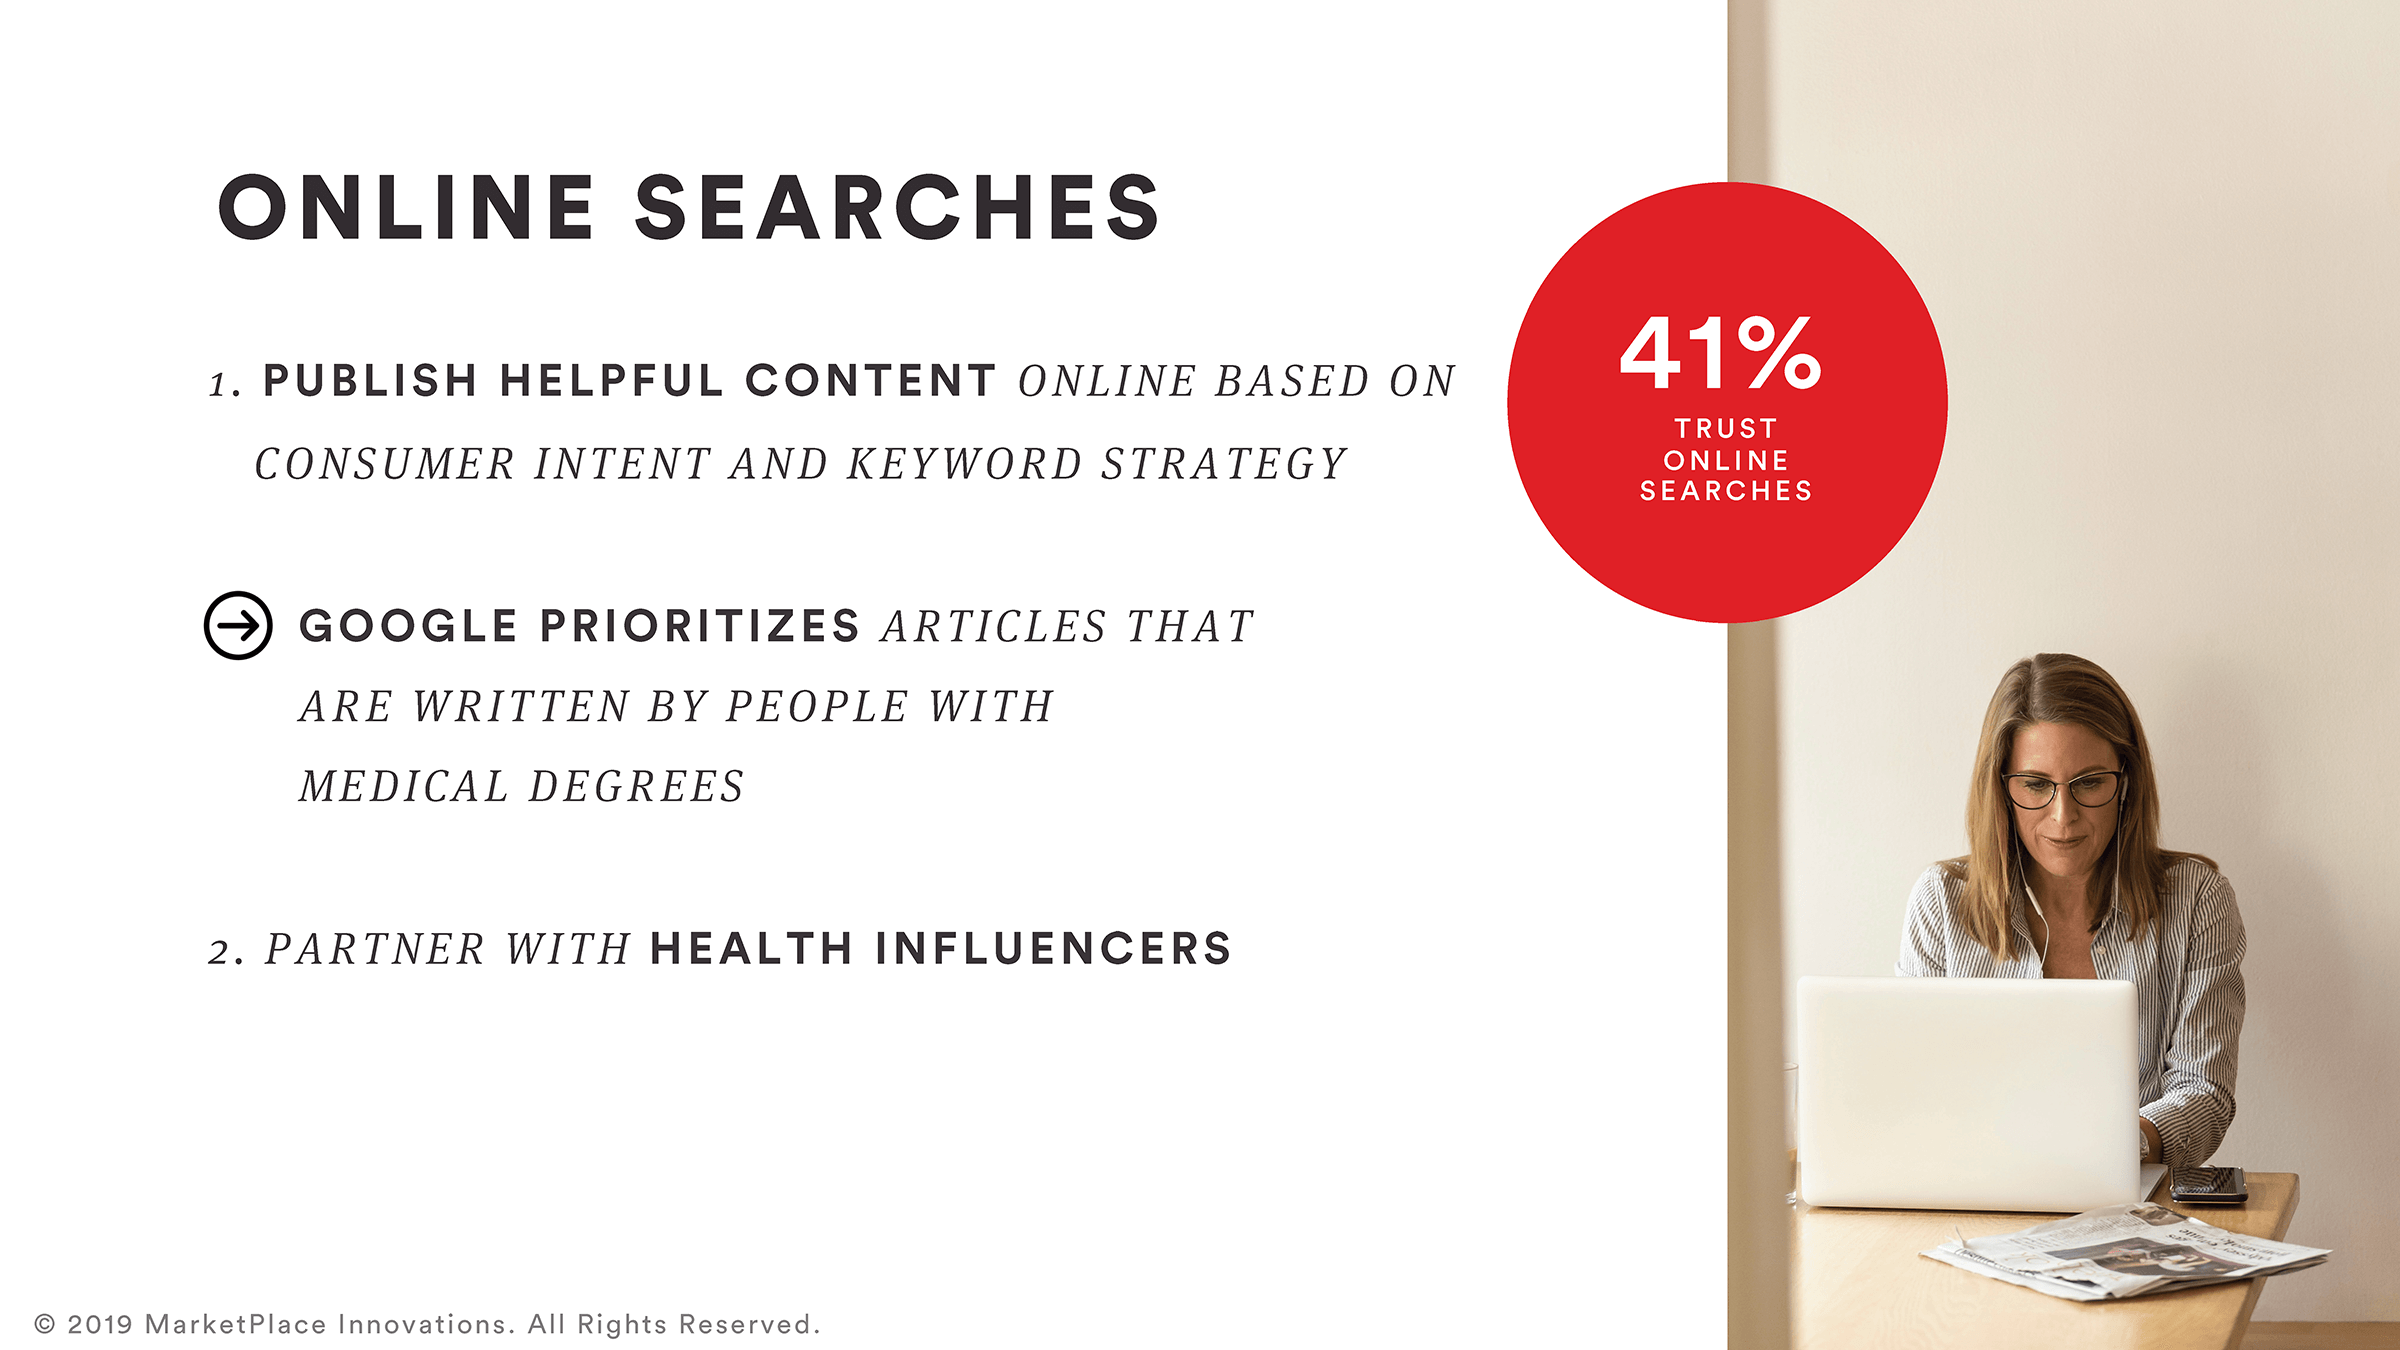 online search trust results from study